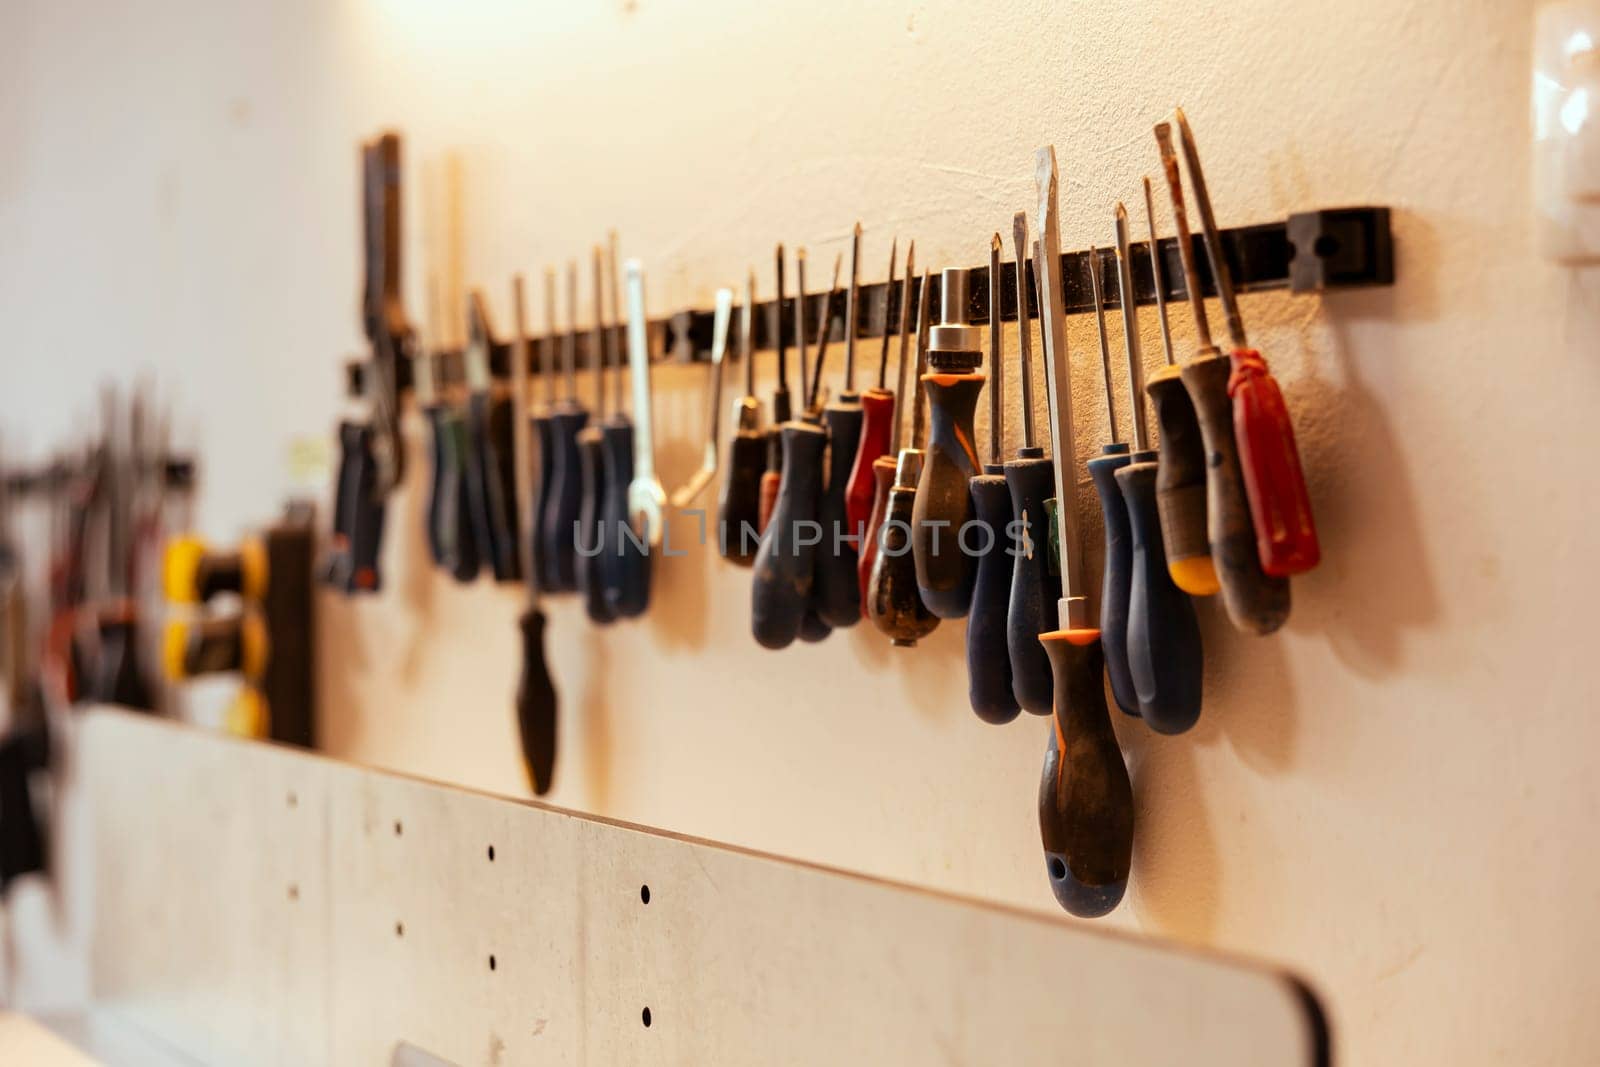 Close up shot of various woodworking tools on rack in workshop used for repairing or creating wooden objects. Chisels, screwdrivers, wrench and pliers on wall in carpentry studio